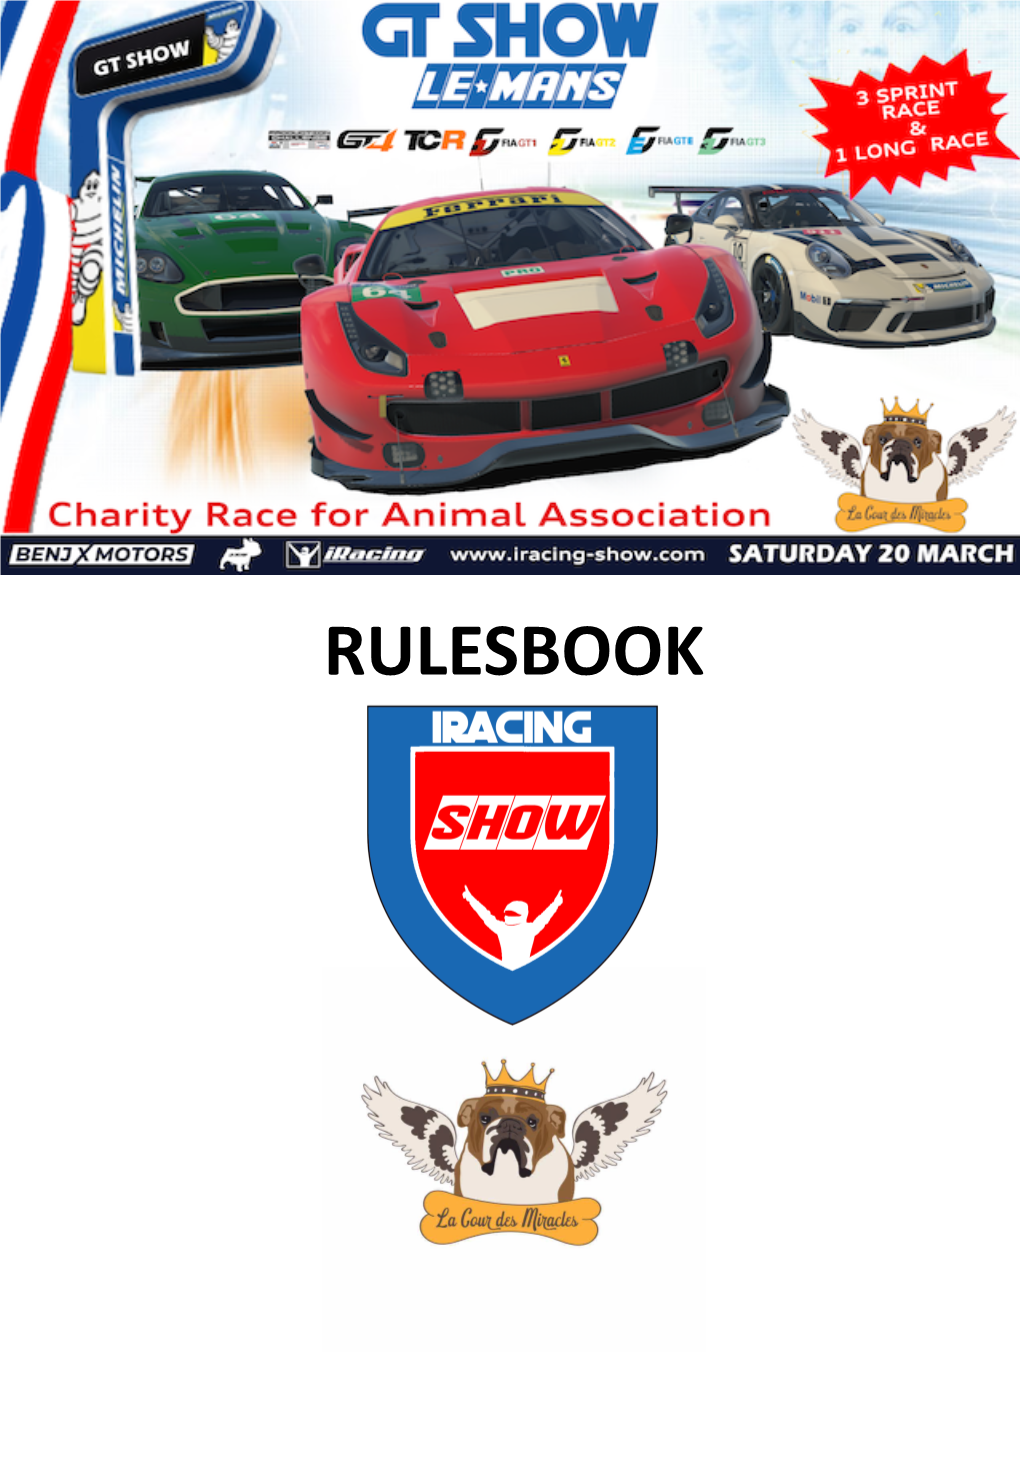 RULESBOOK INTRODUCTION the GT SHOW Is a Charity Race for Animal Association